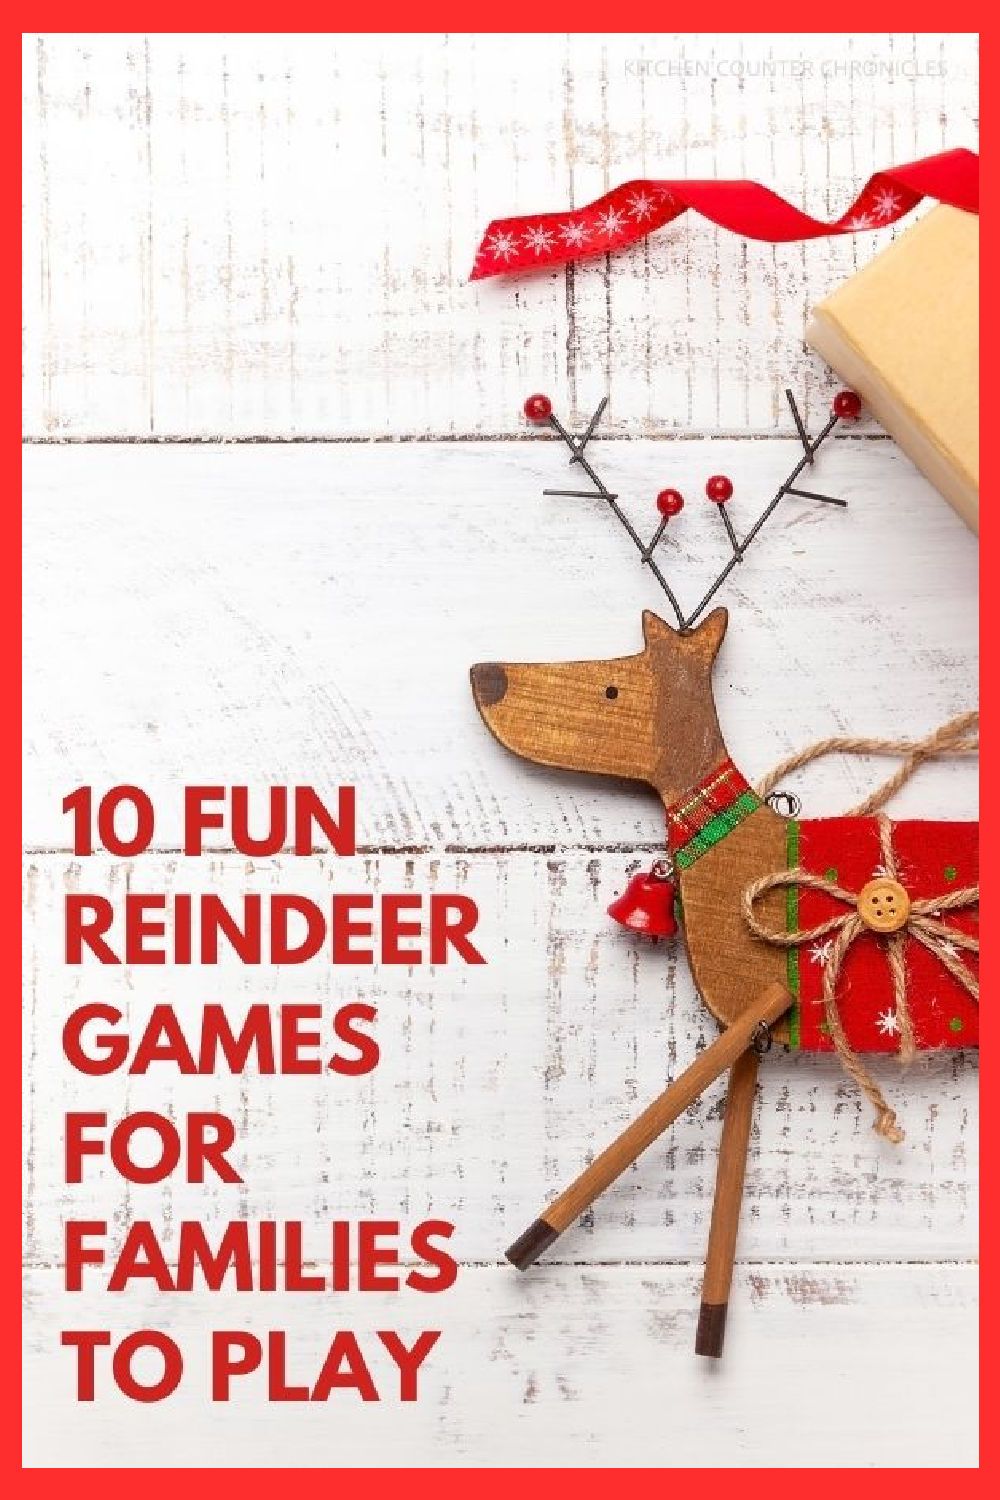 10+ Festive and Fun Christmas Reindeer Games to Play HD Wallpaper